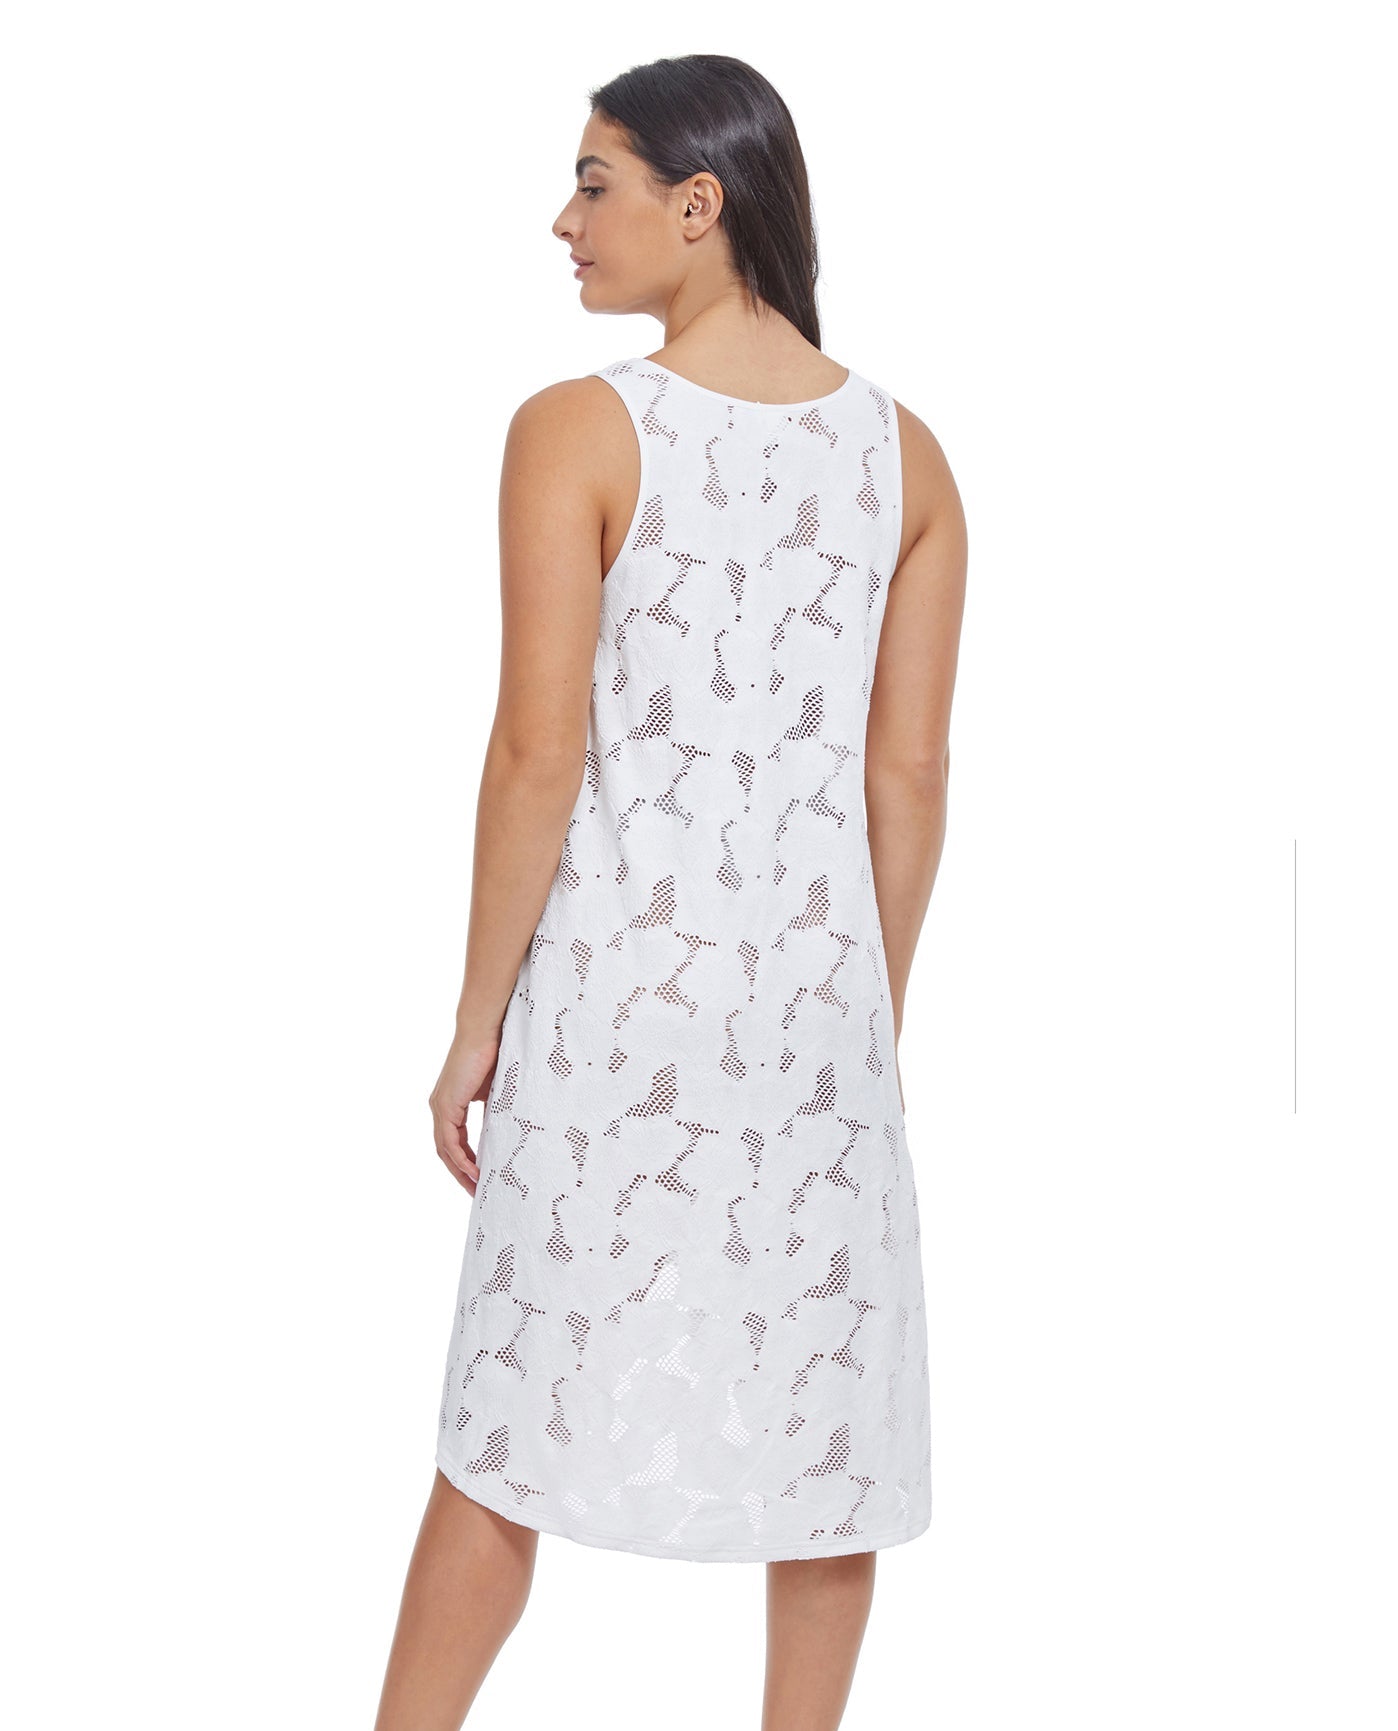 Back View Of Profile By Gottex Late Bloomer High Low Mesh Beach Dress Cover Up | PROFILE LATE BLOOMER WHITE